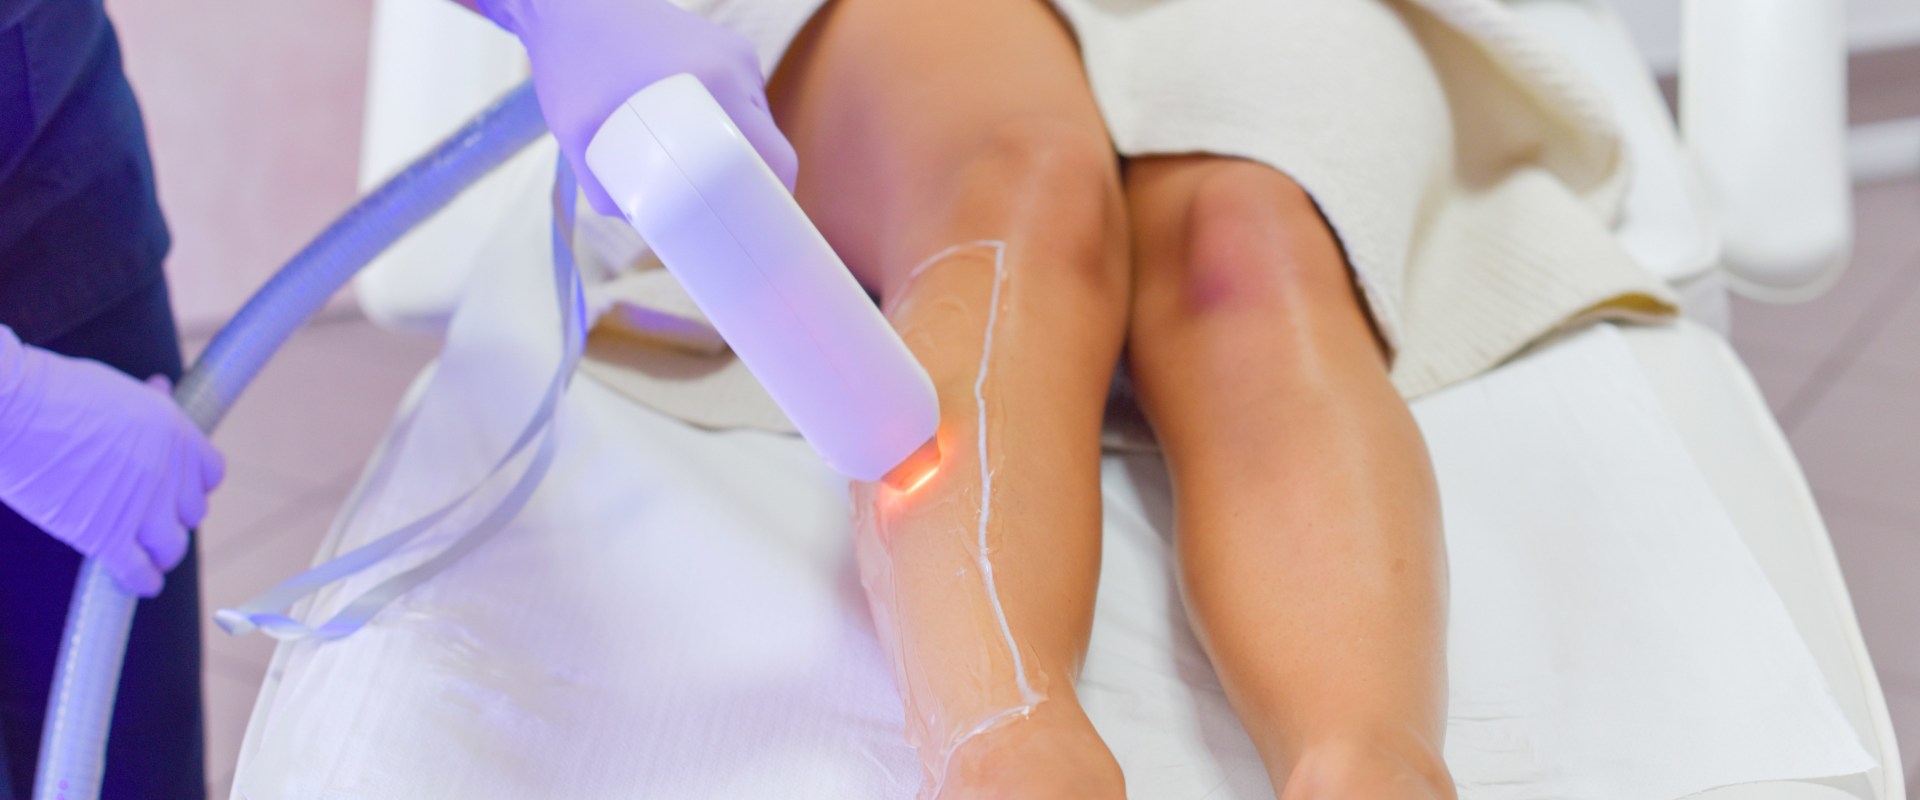 Is Laser Hair Removal the Right Choice for You?